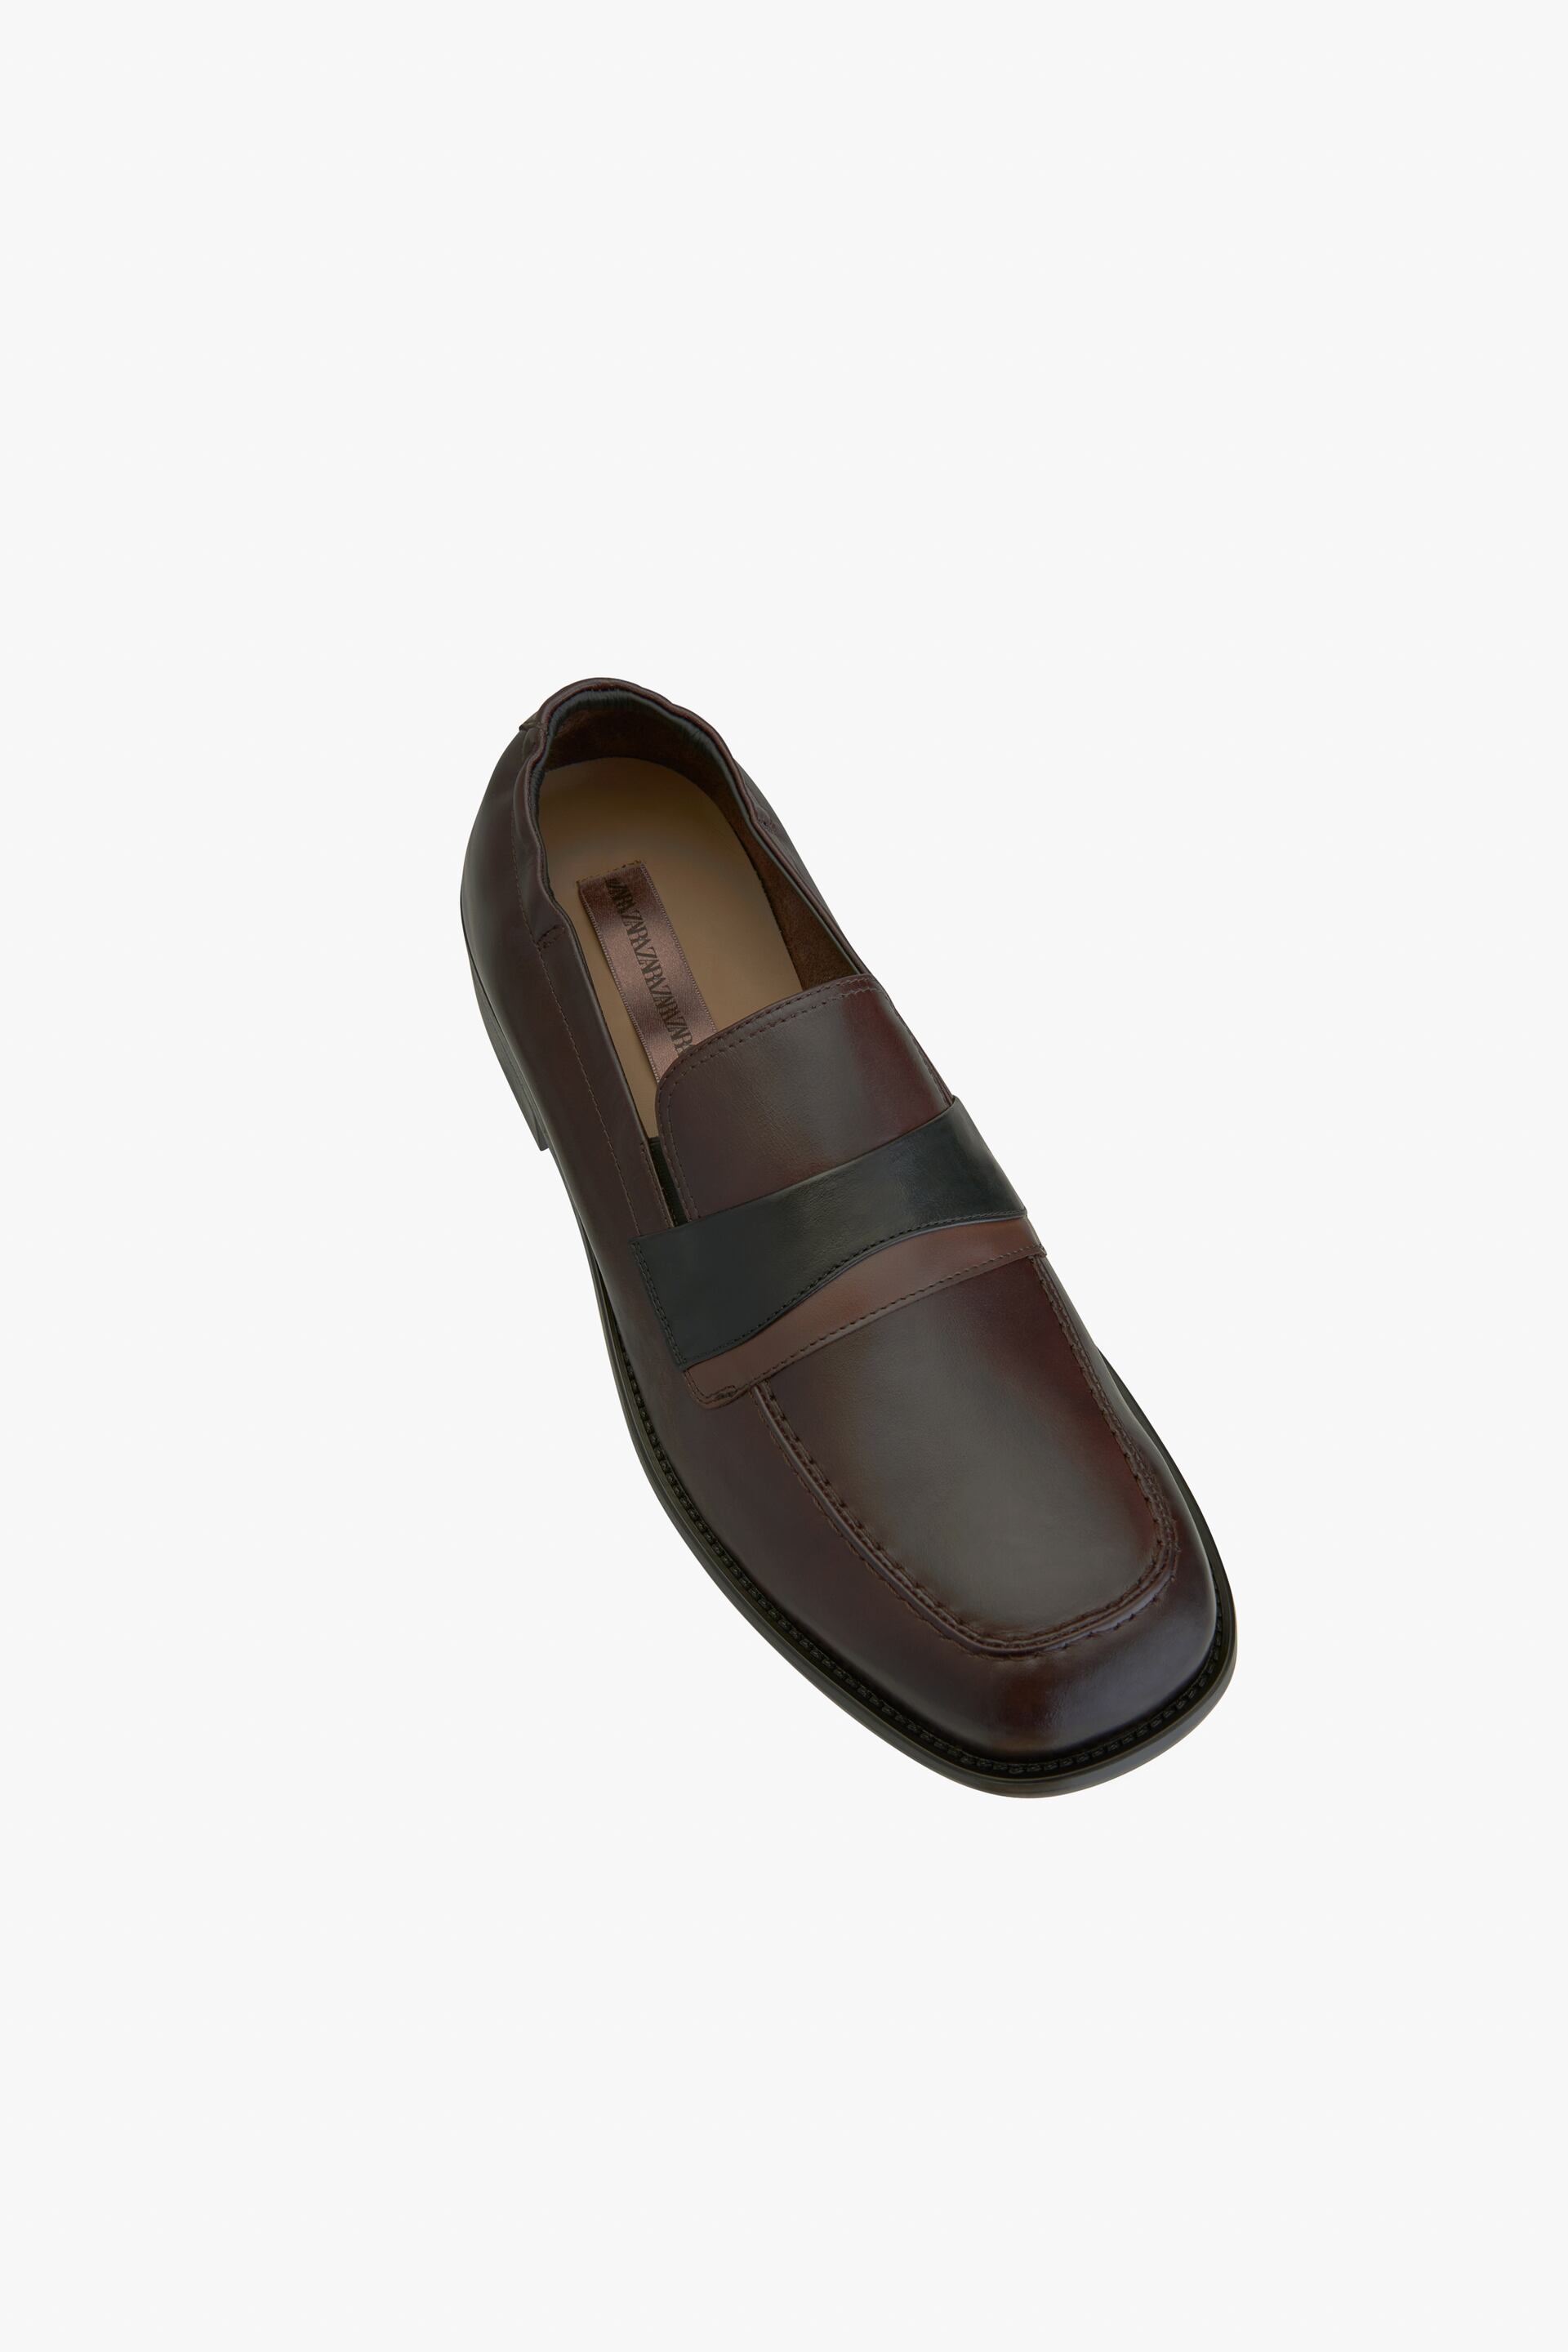 Zara CONTRAST LEATHER LOAFERS - 103428493-100-